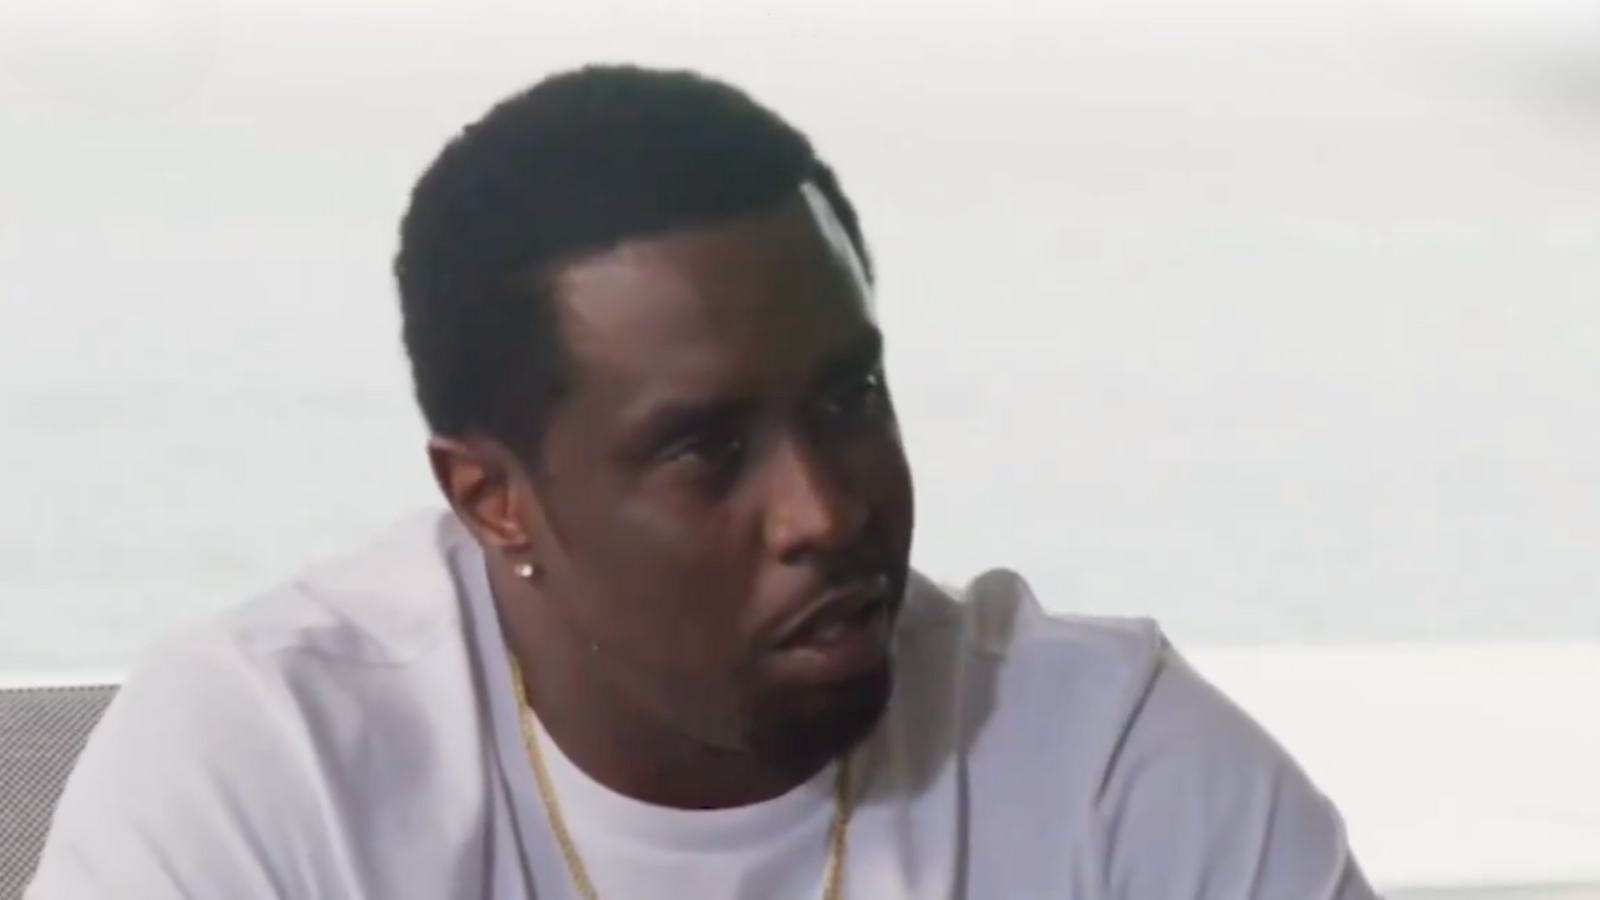 P Diddy Files To Dismiss Certain Claims In Sexual Assault Suit